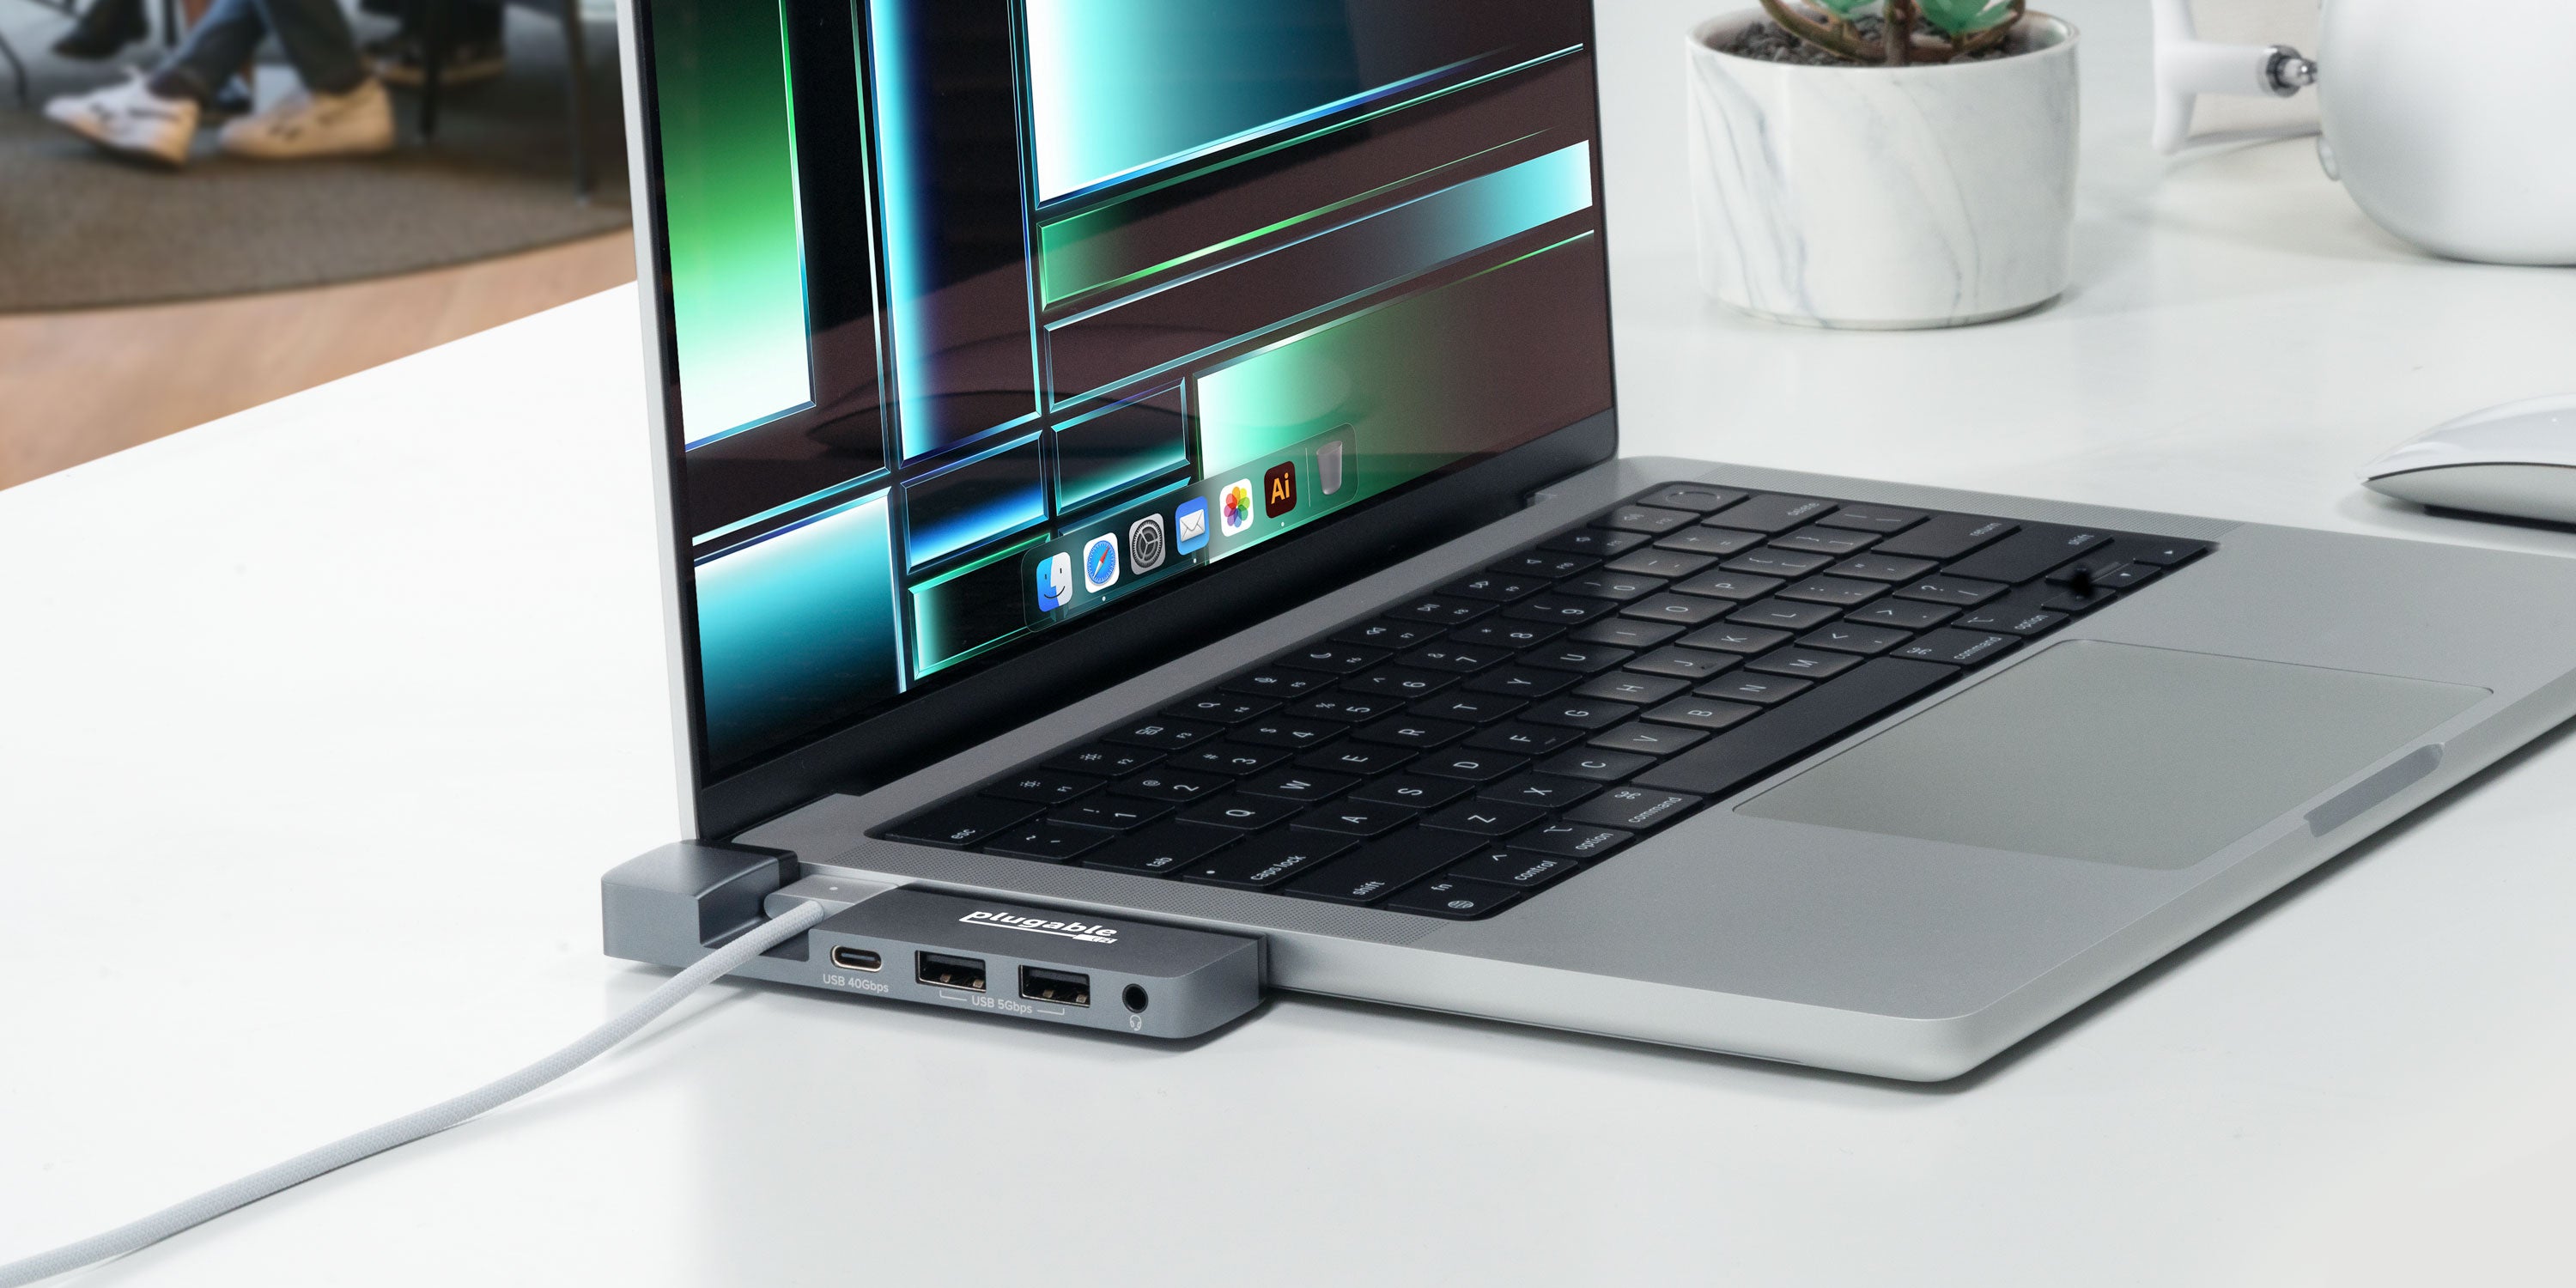 Thunderbolt 2 to USB 3.0 adapter for older Macs and MacBooks